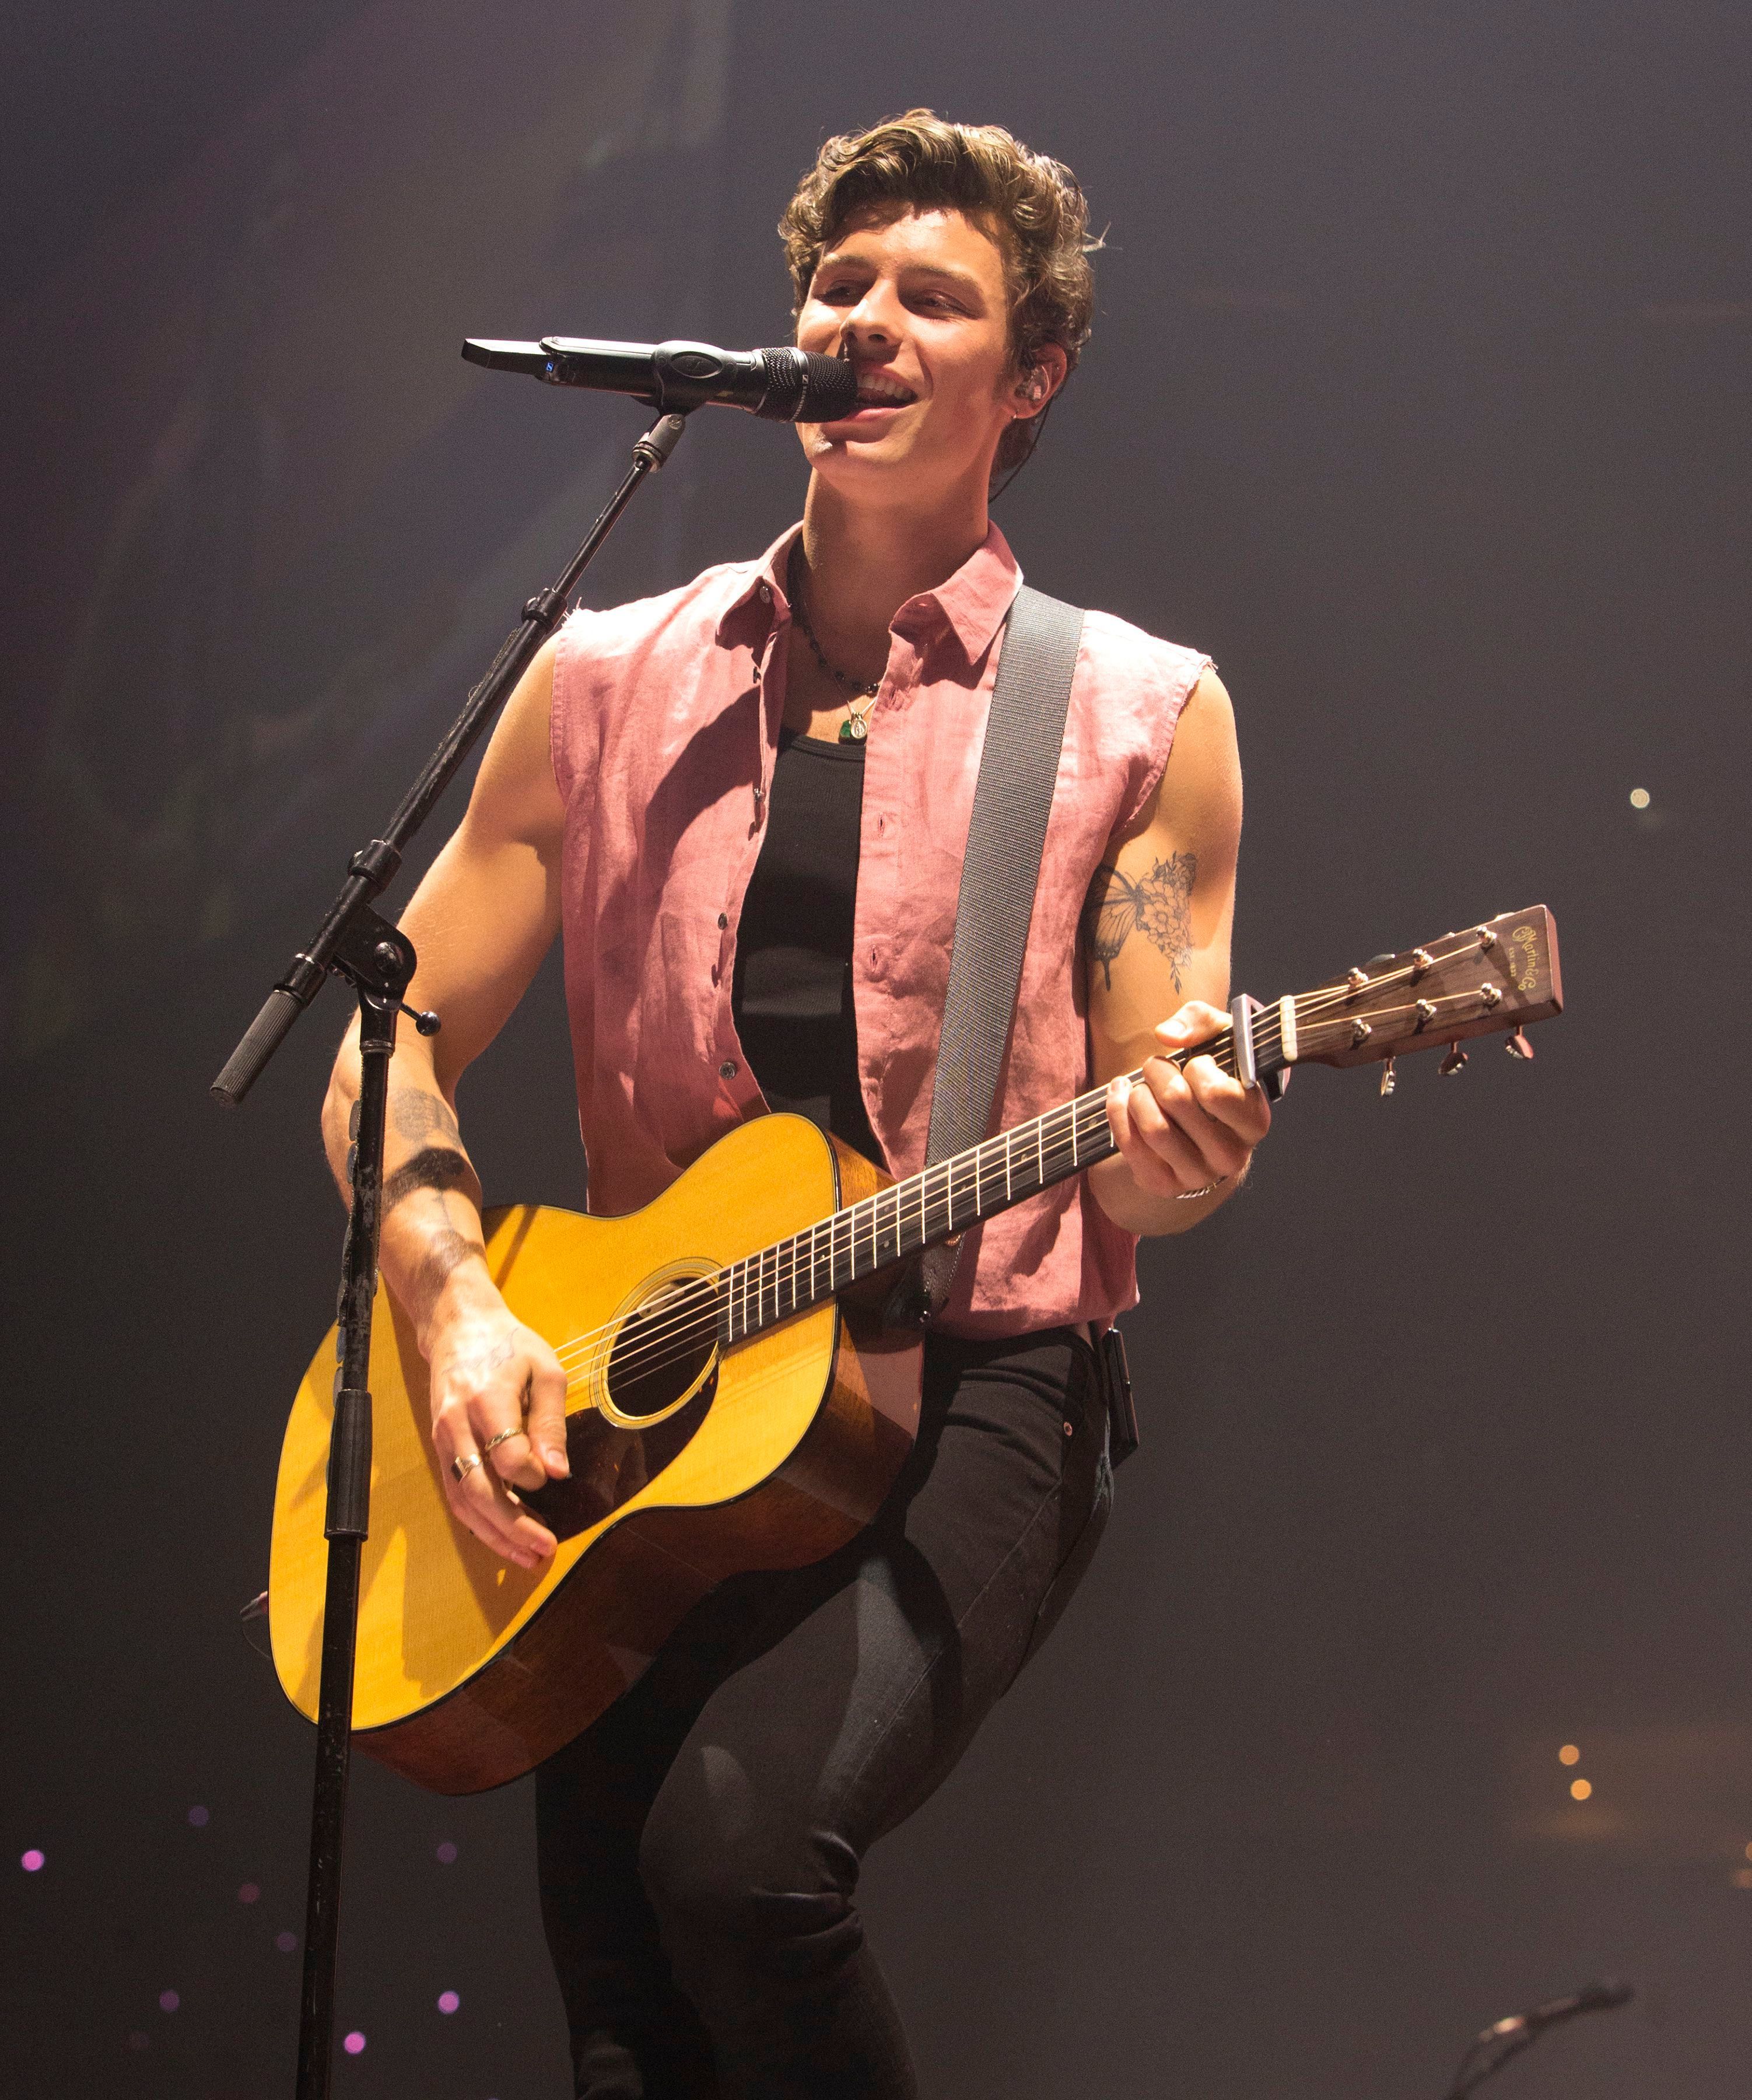 Shawn Mendes concert - Week in celebrity photos for Aug. 26-30, 2019 ...